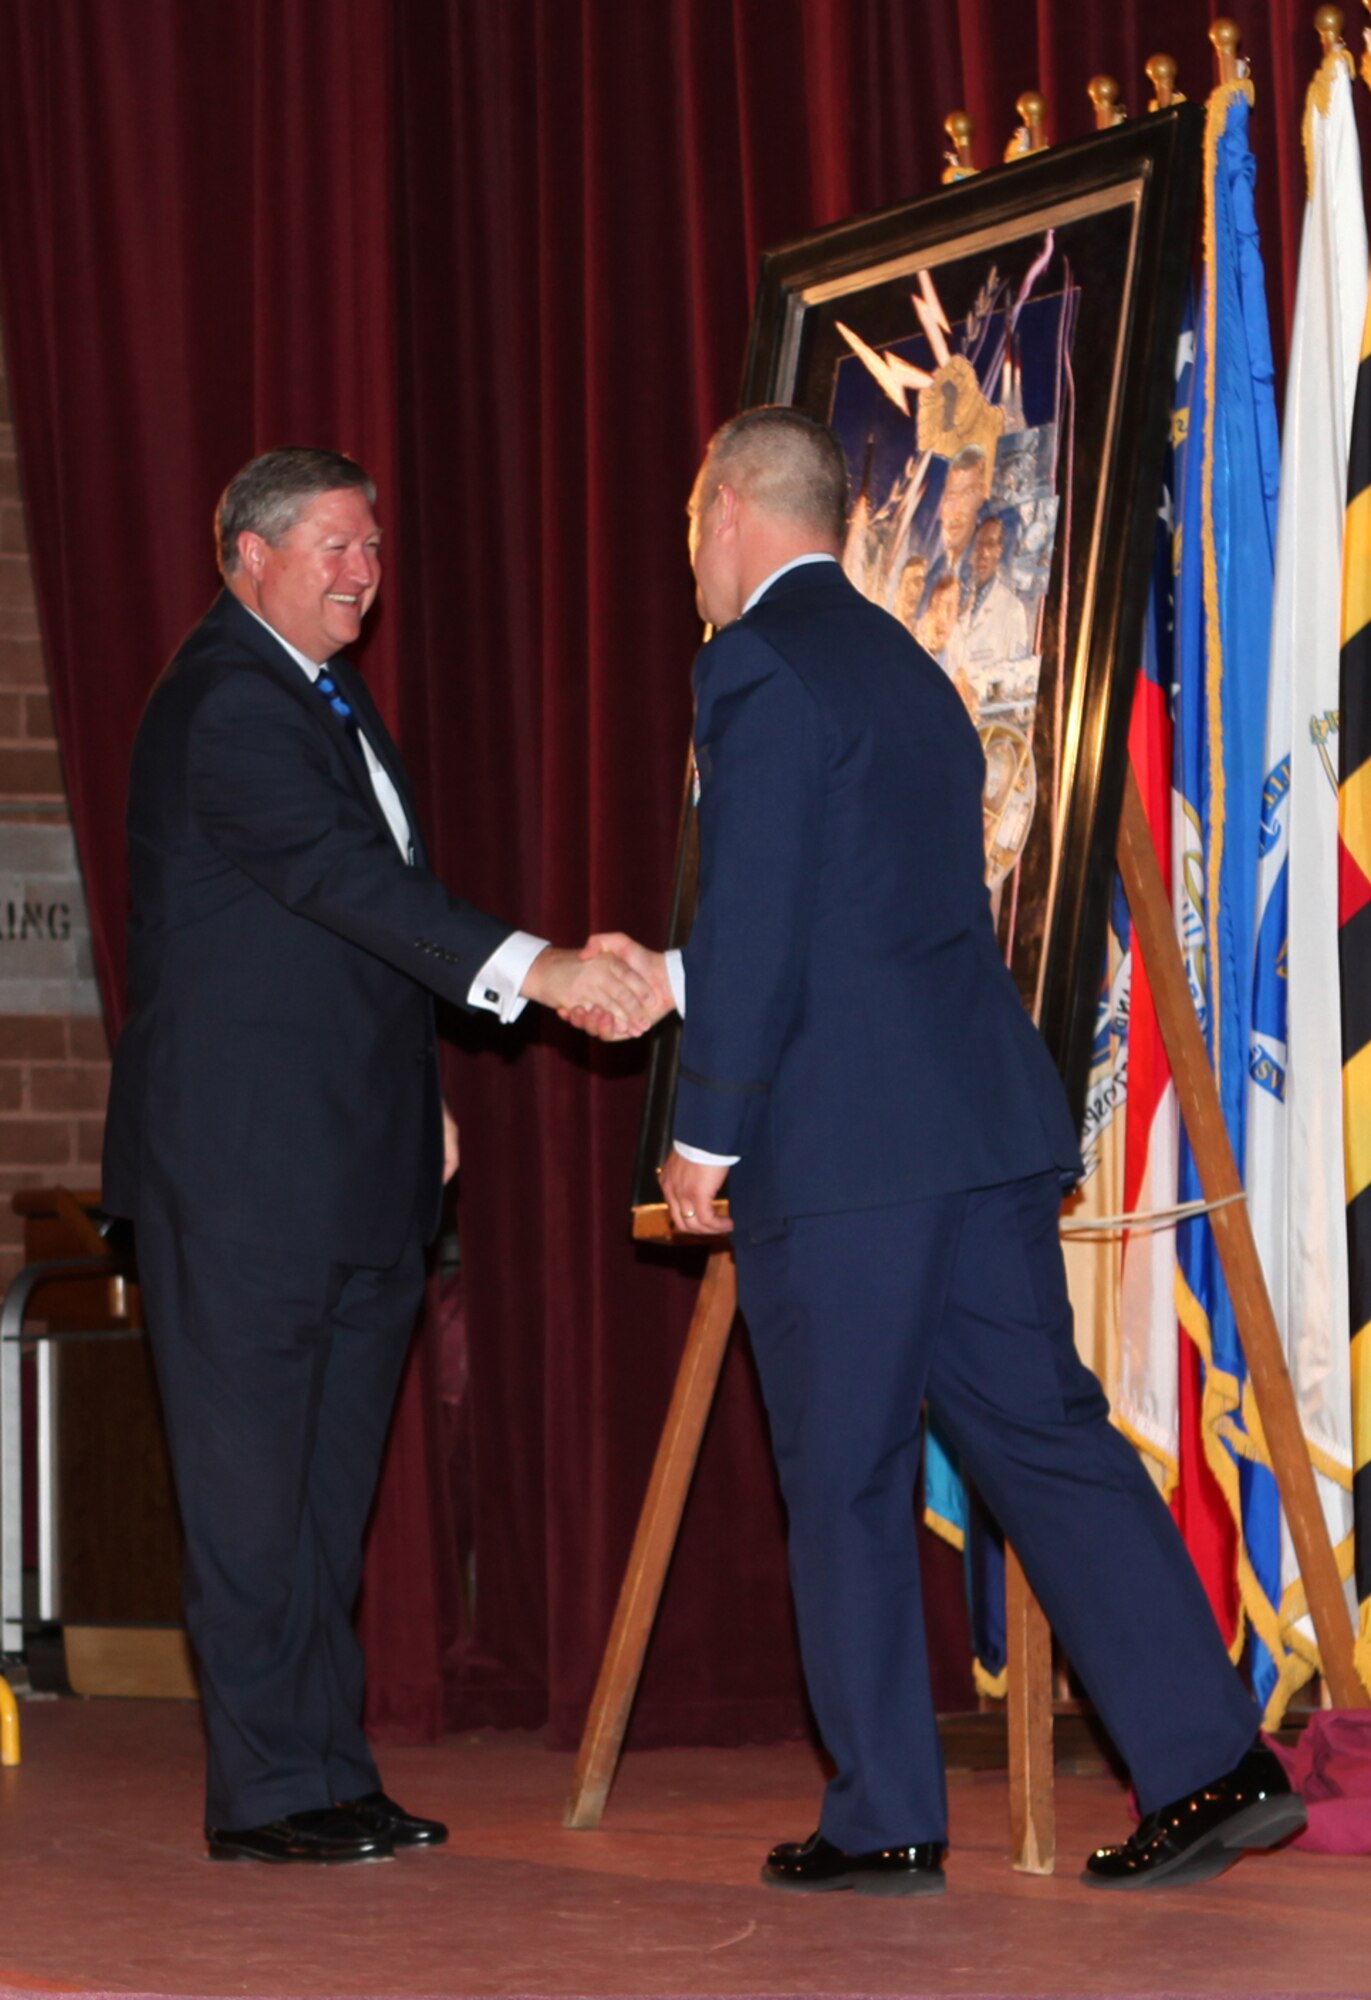 Secretary of the Air Force Michael Donley shakes hands with Capt. Warren Neary, Twentieth Air Force, at the F.E. Warren Theater Oct. 9. The 50th Anniversary commemorative painting by Captain Neary will be displayed in Secretary Donley’s office as part of the Air Force art program. (U.S. Air Force Photo by Berni Ernst)
